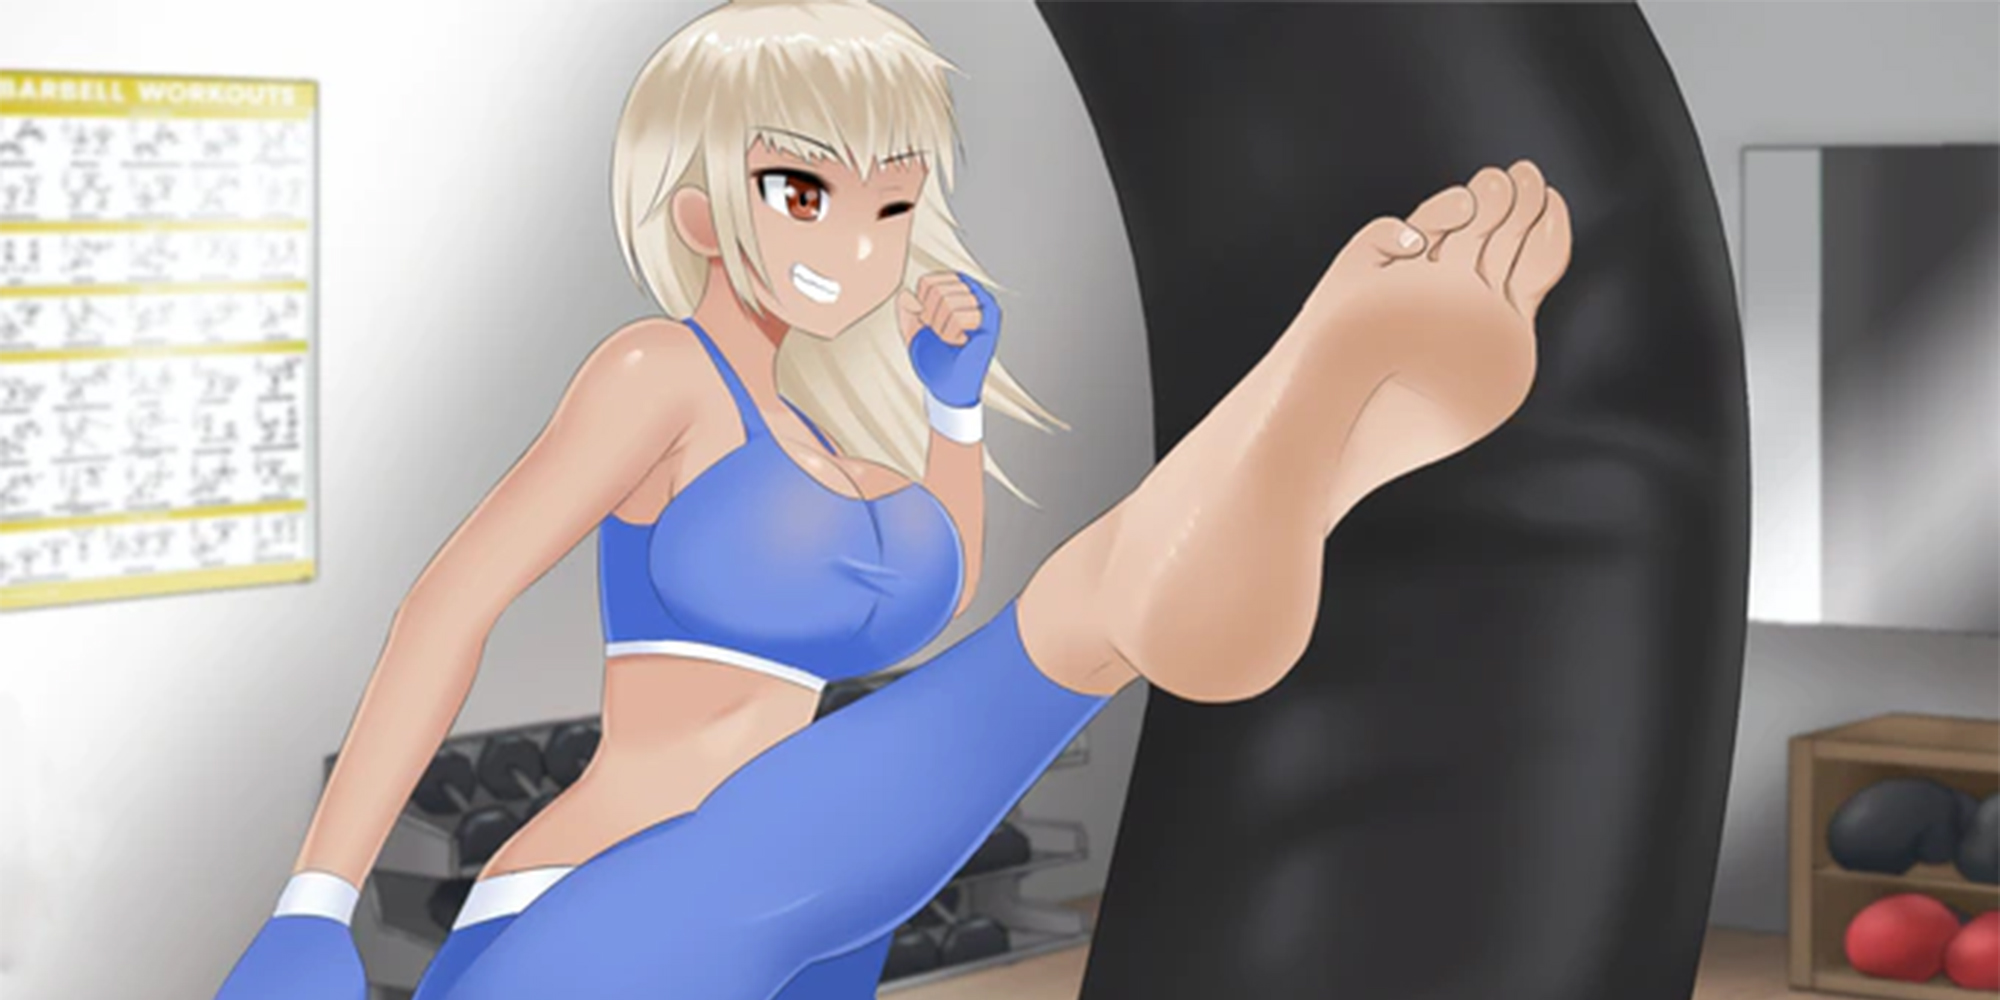 My Toes Story Kickstarter Offers Foot Fetish Visual Novel image picture picture